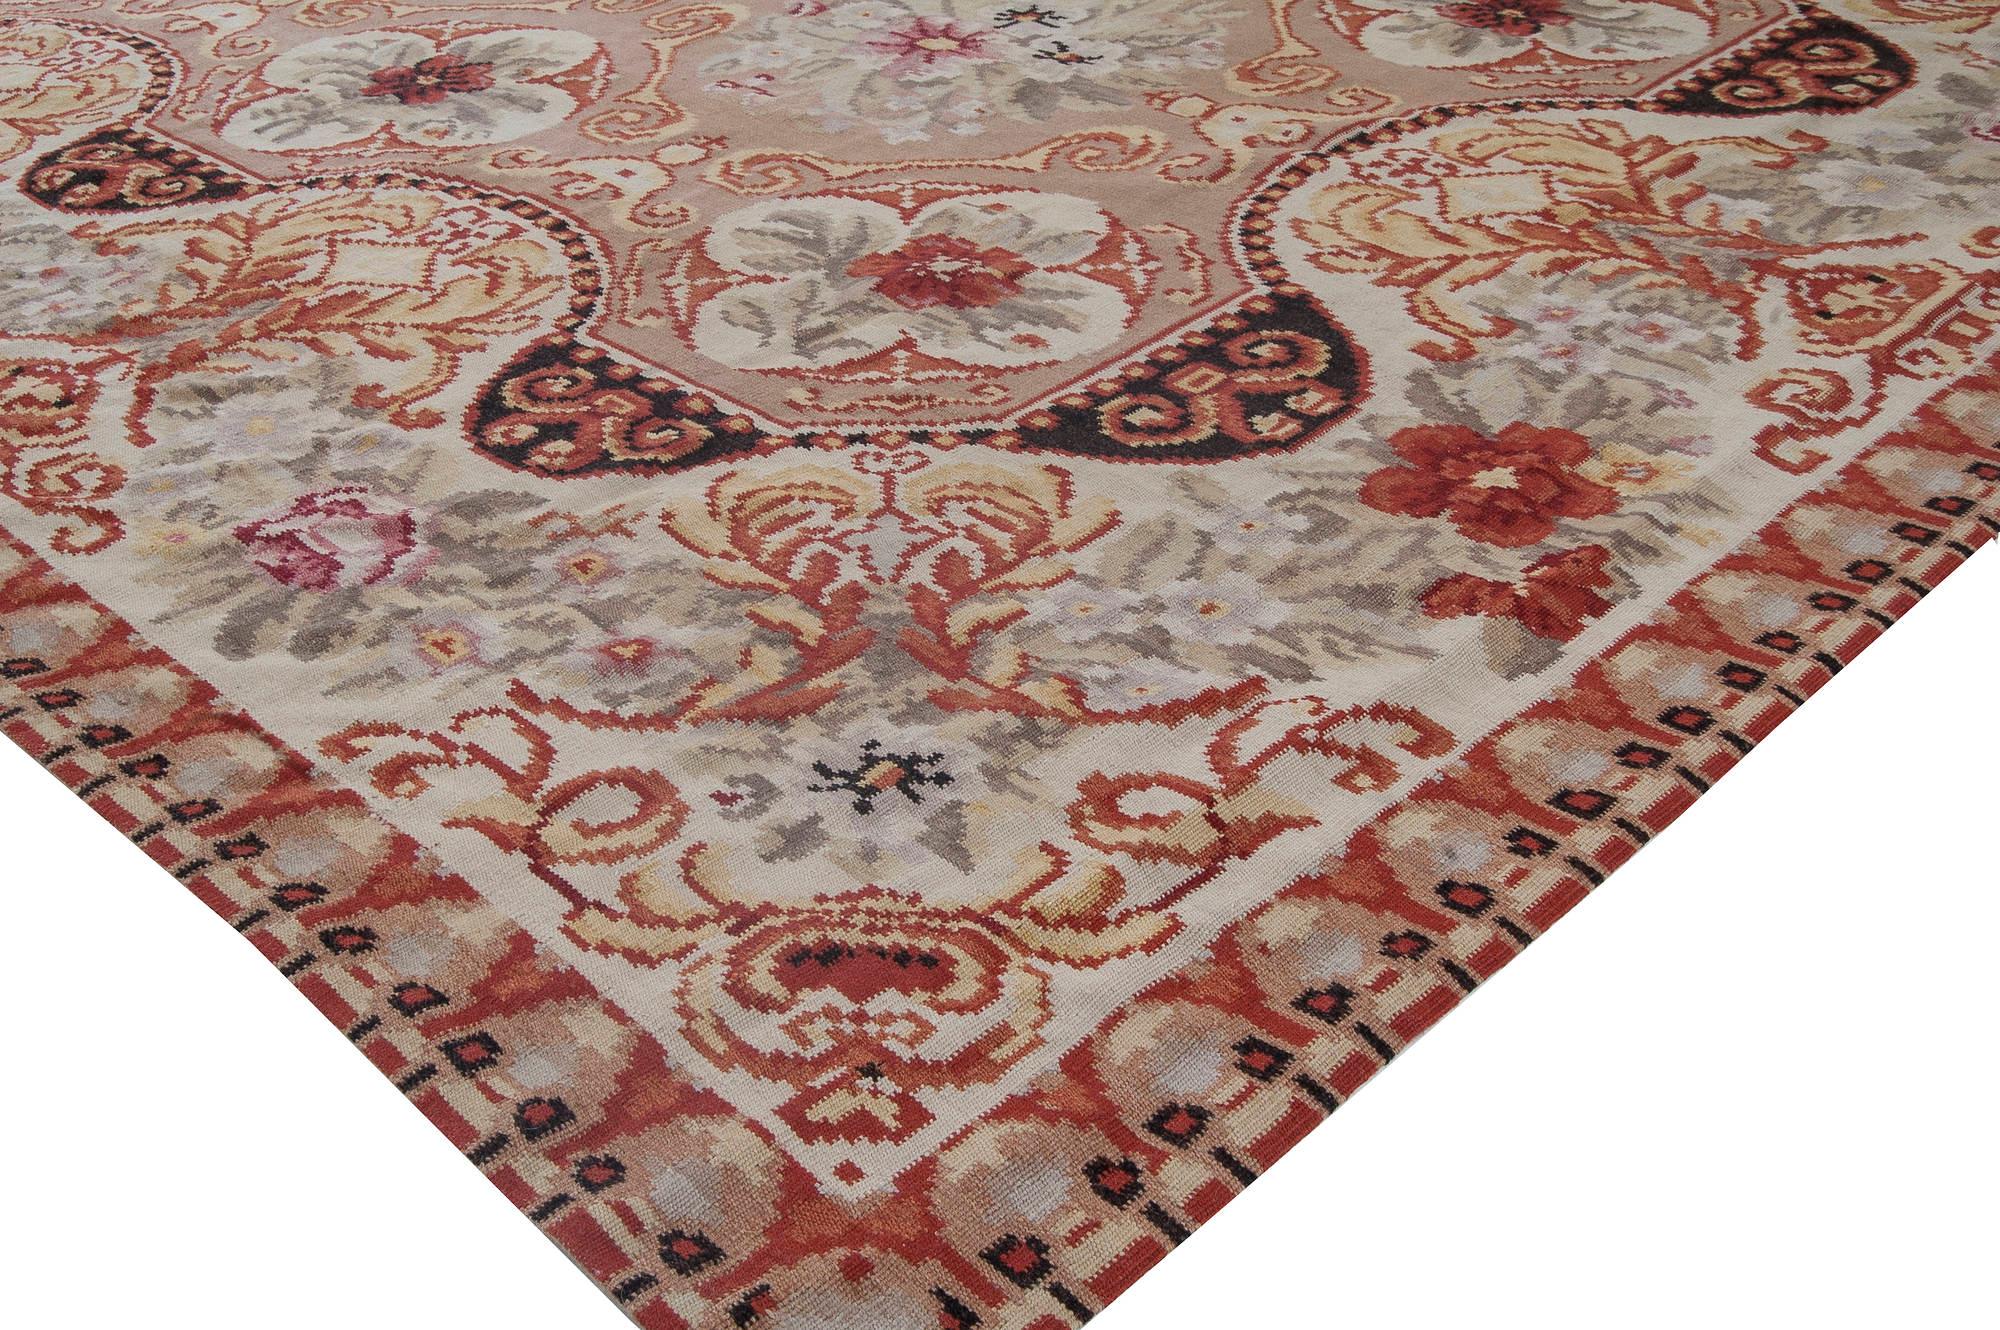 Contemporary European Inspired Bassarabian Floral Rug by Doris Leslie Blau In New Condition For Sale In New York, NY